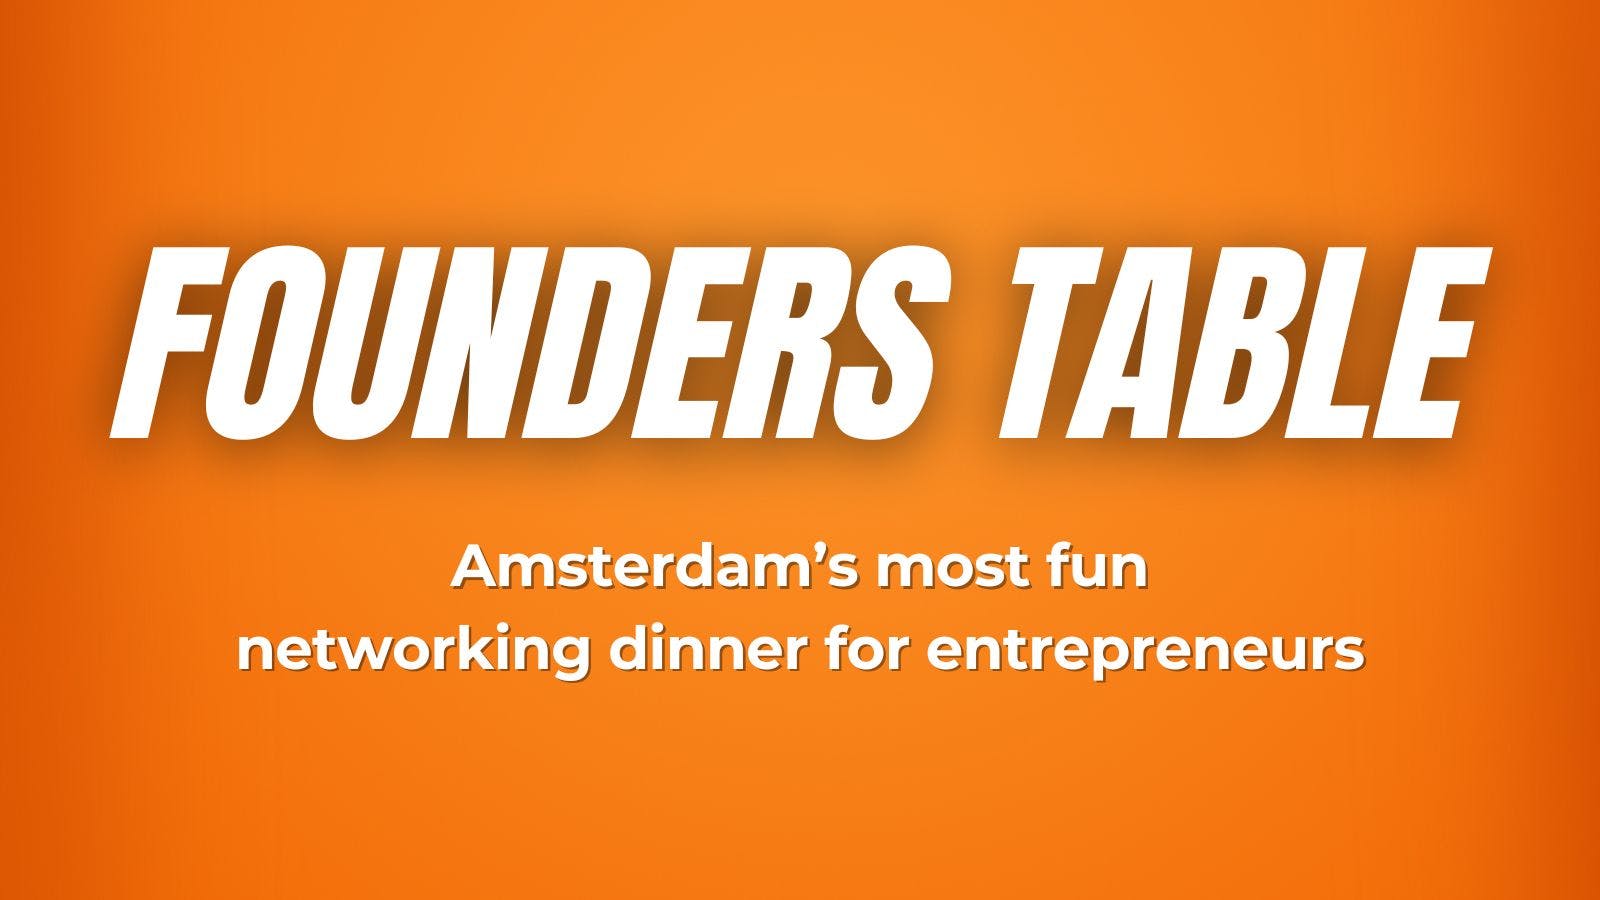 Amsterdam Founders Table: a fun networking dinner for entrepreneurs